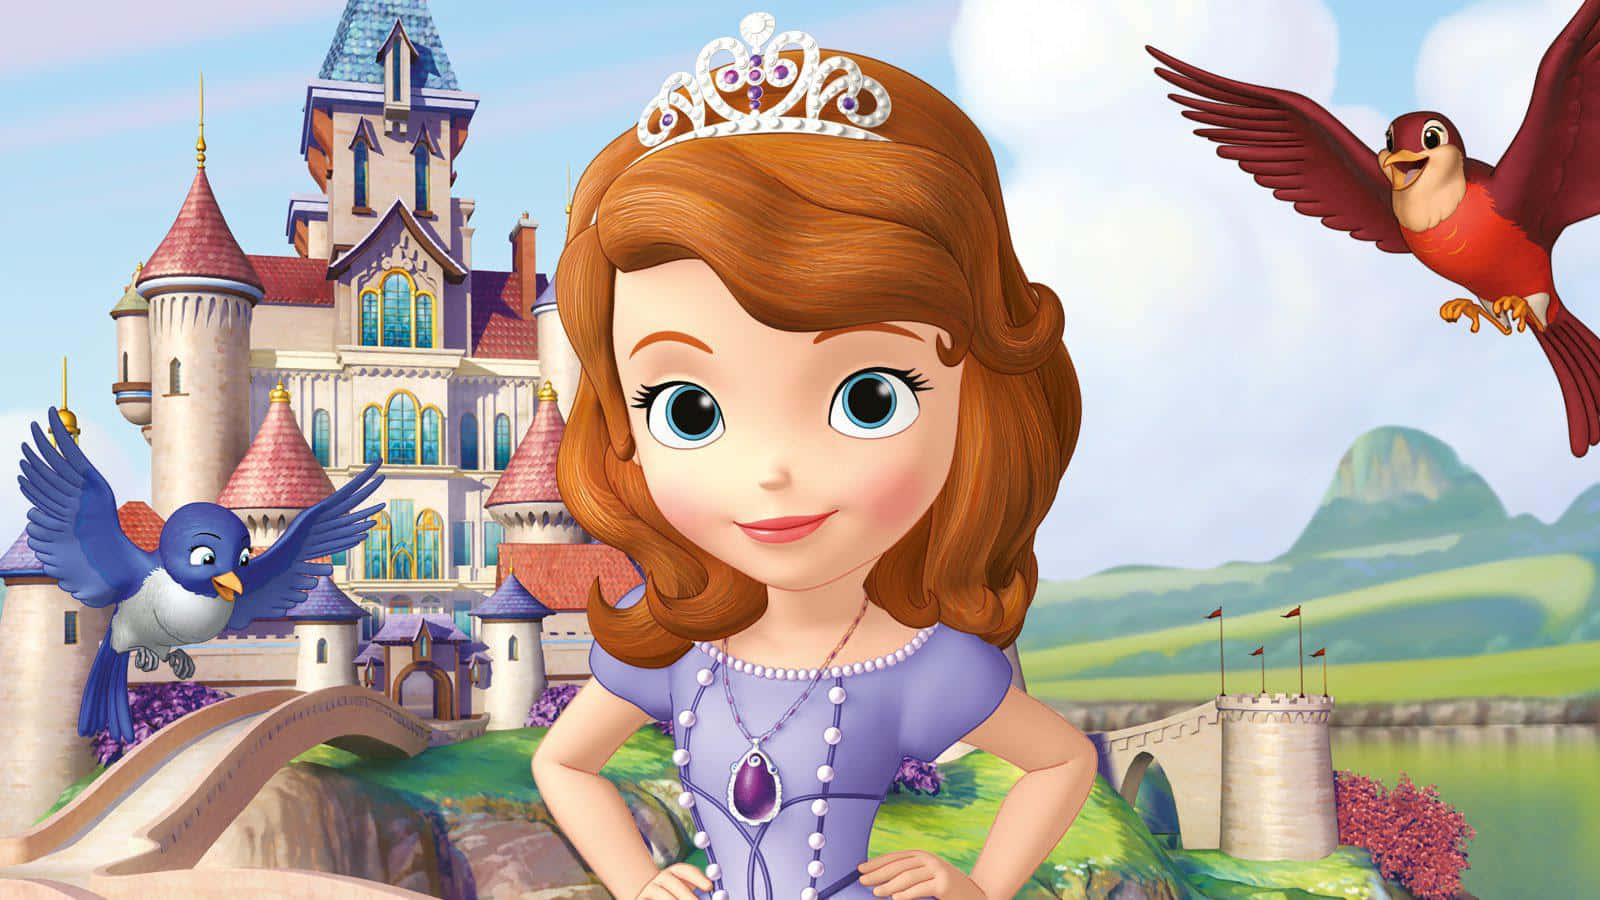 Wishful Thinking: Princess Sofia Lives Happily Ever After" Wallpaper